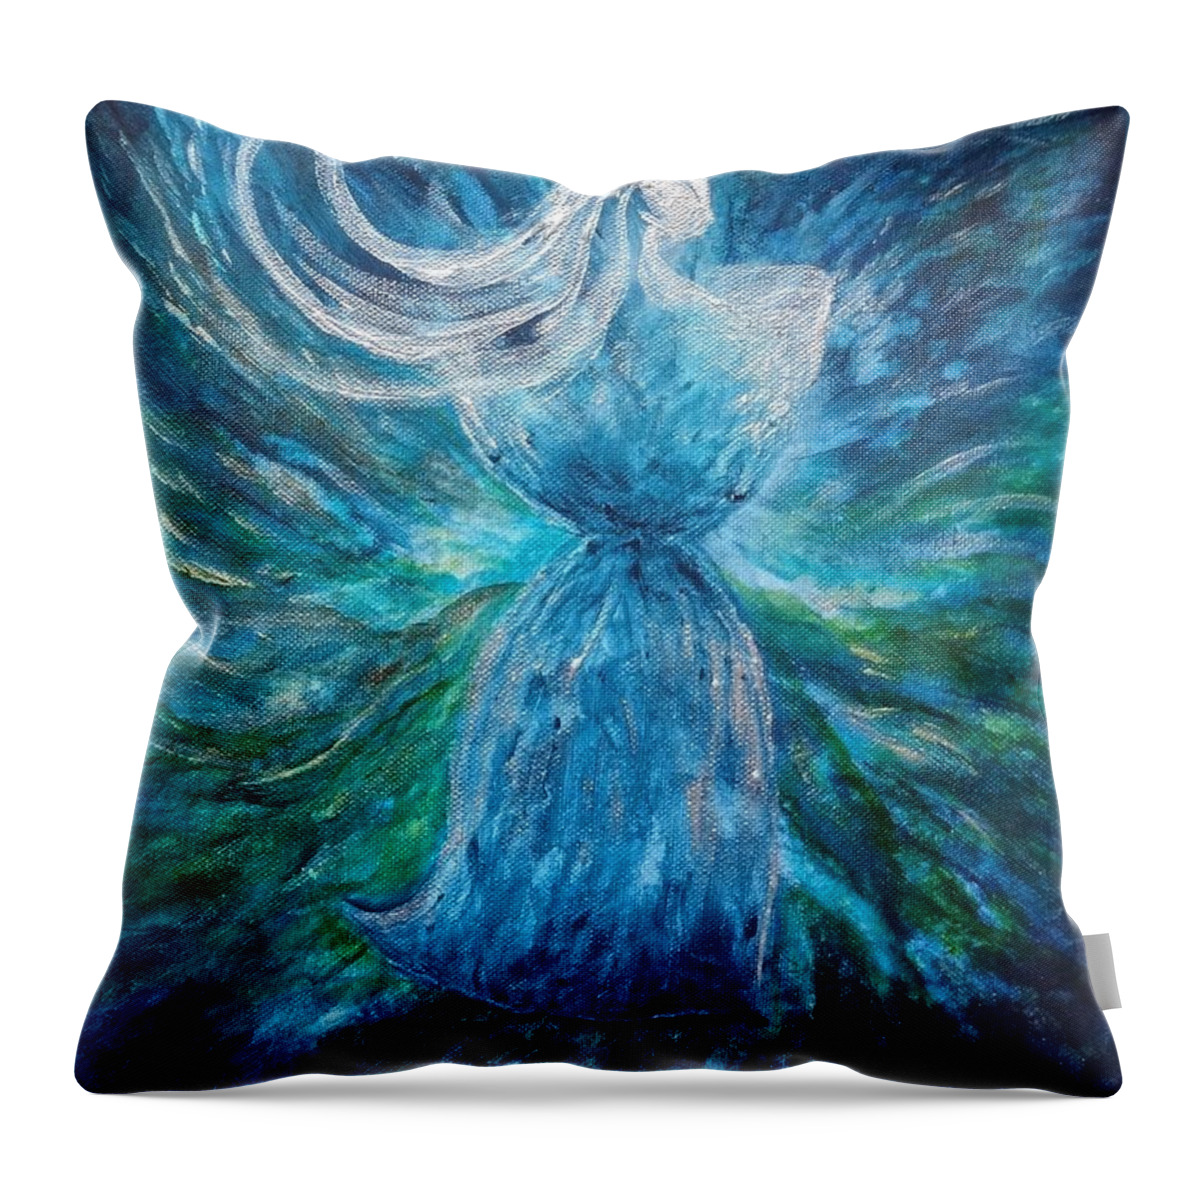 Latte Stone Throw Pillow featuring the painting Latte Stone Woman by Michelle Pier